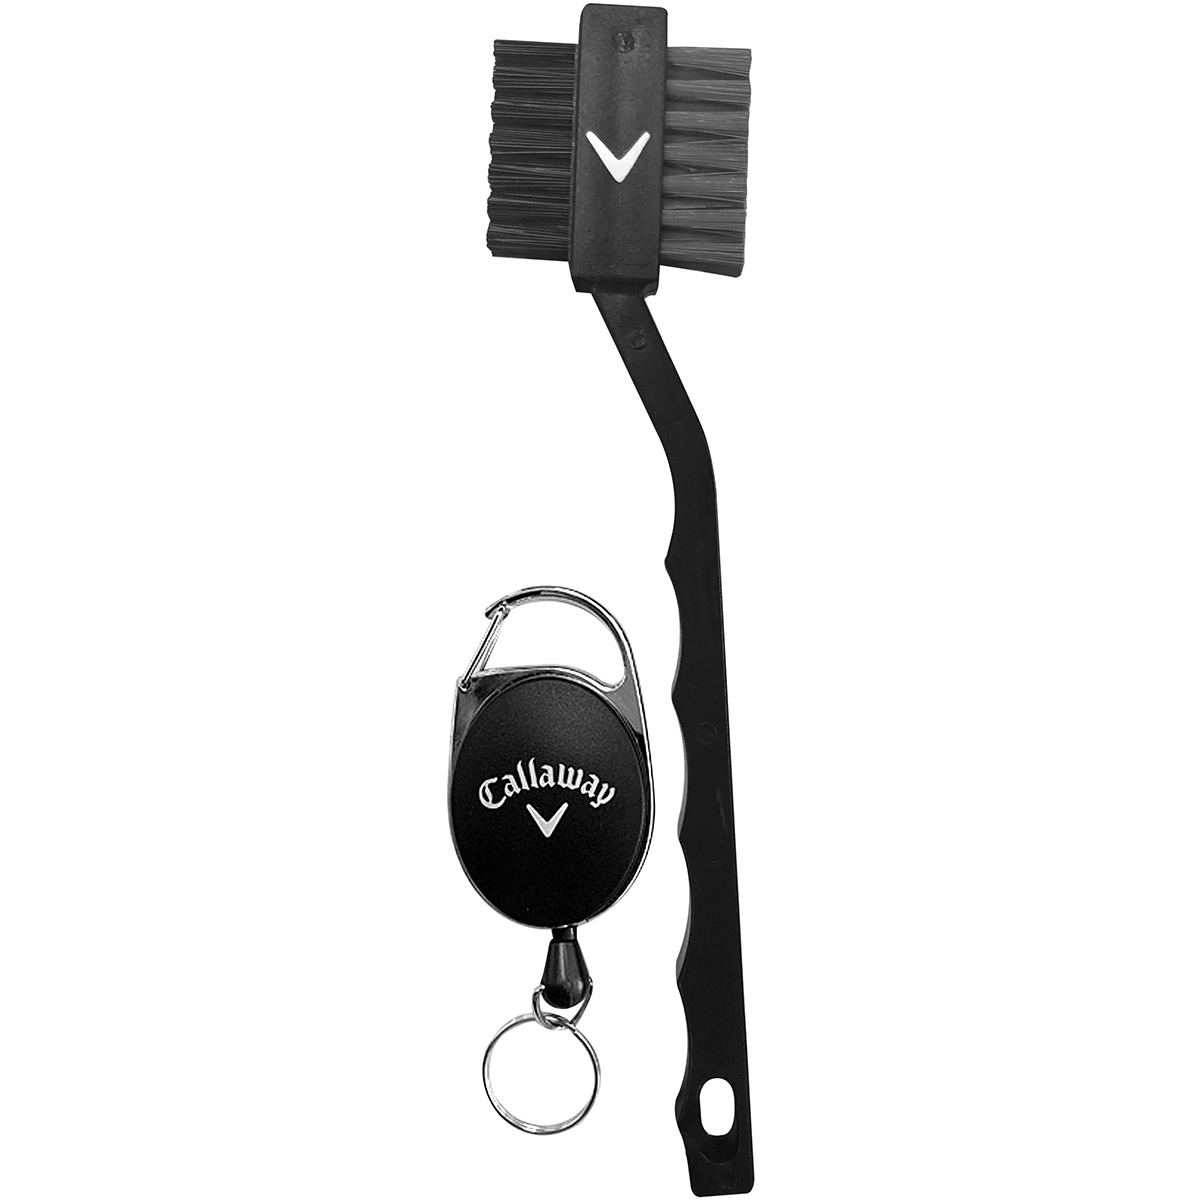 Callaway Golf Club Brush, with Spring-Loaded Retractable Cord - image 1 of 3